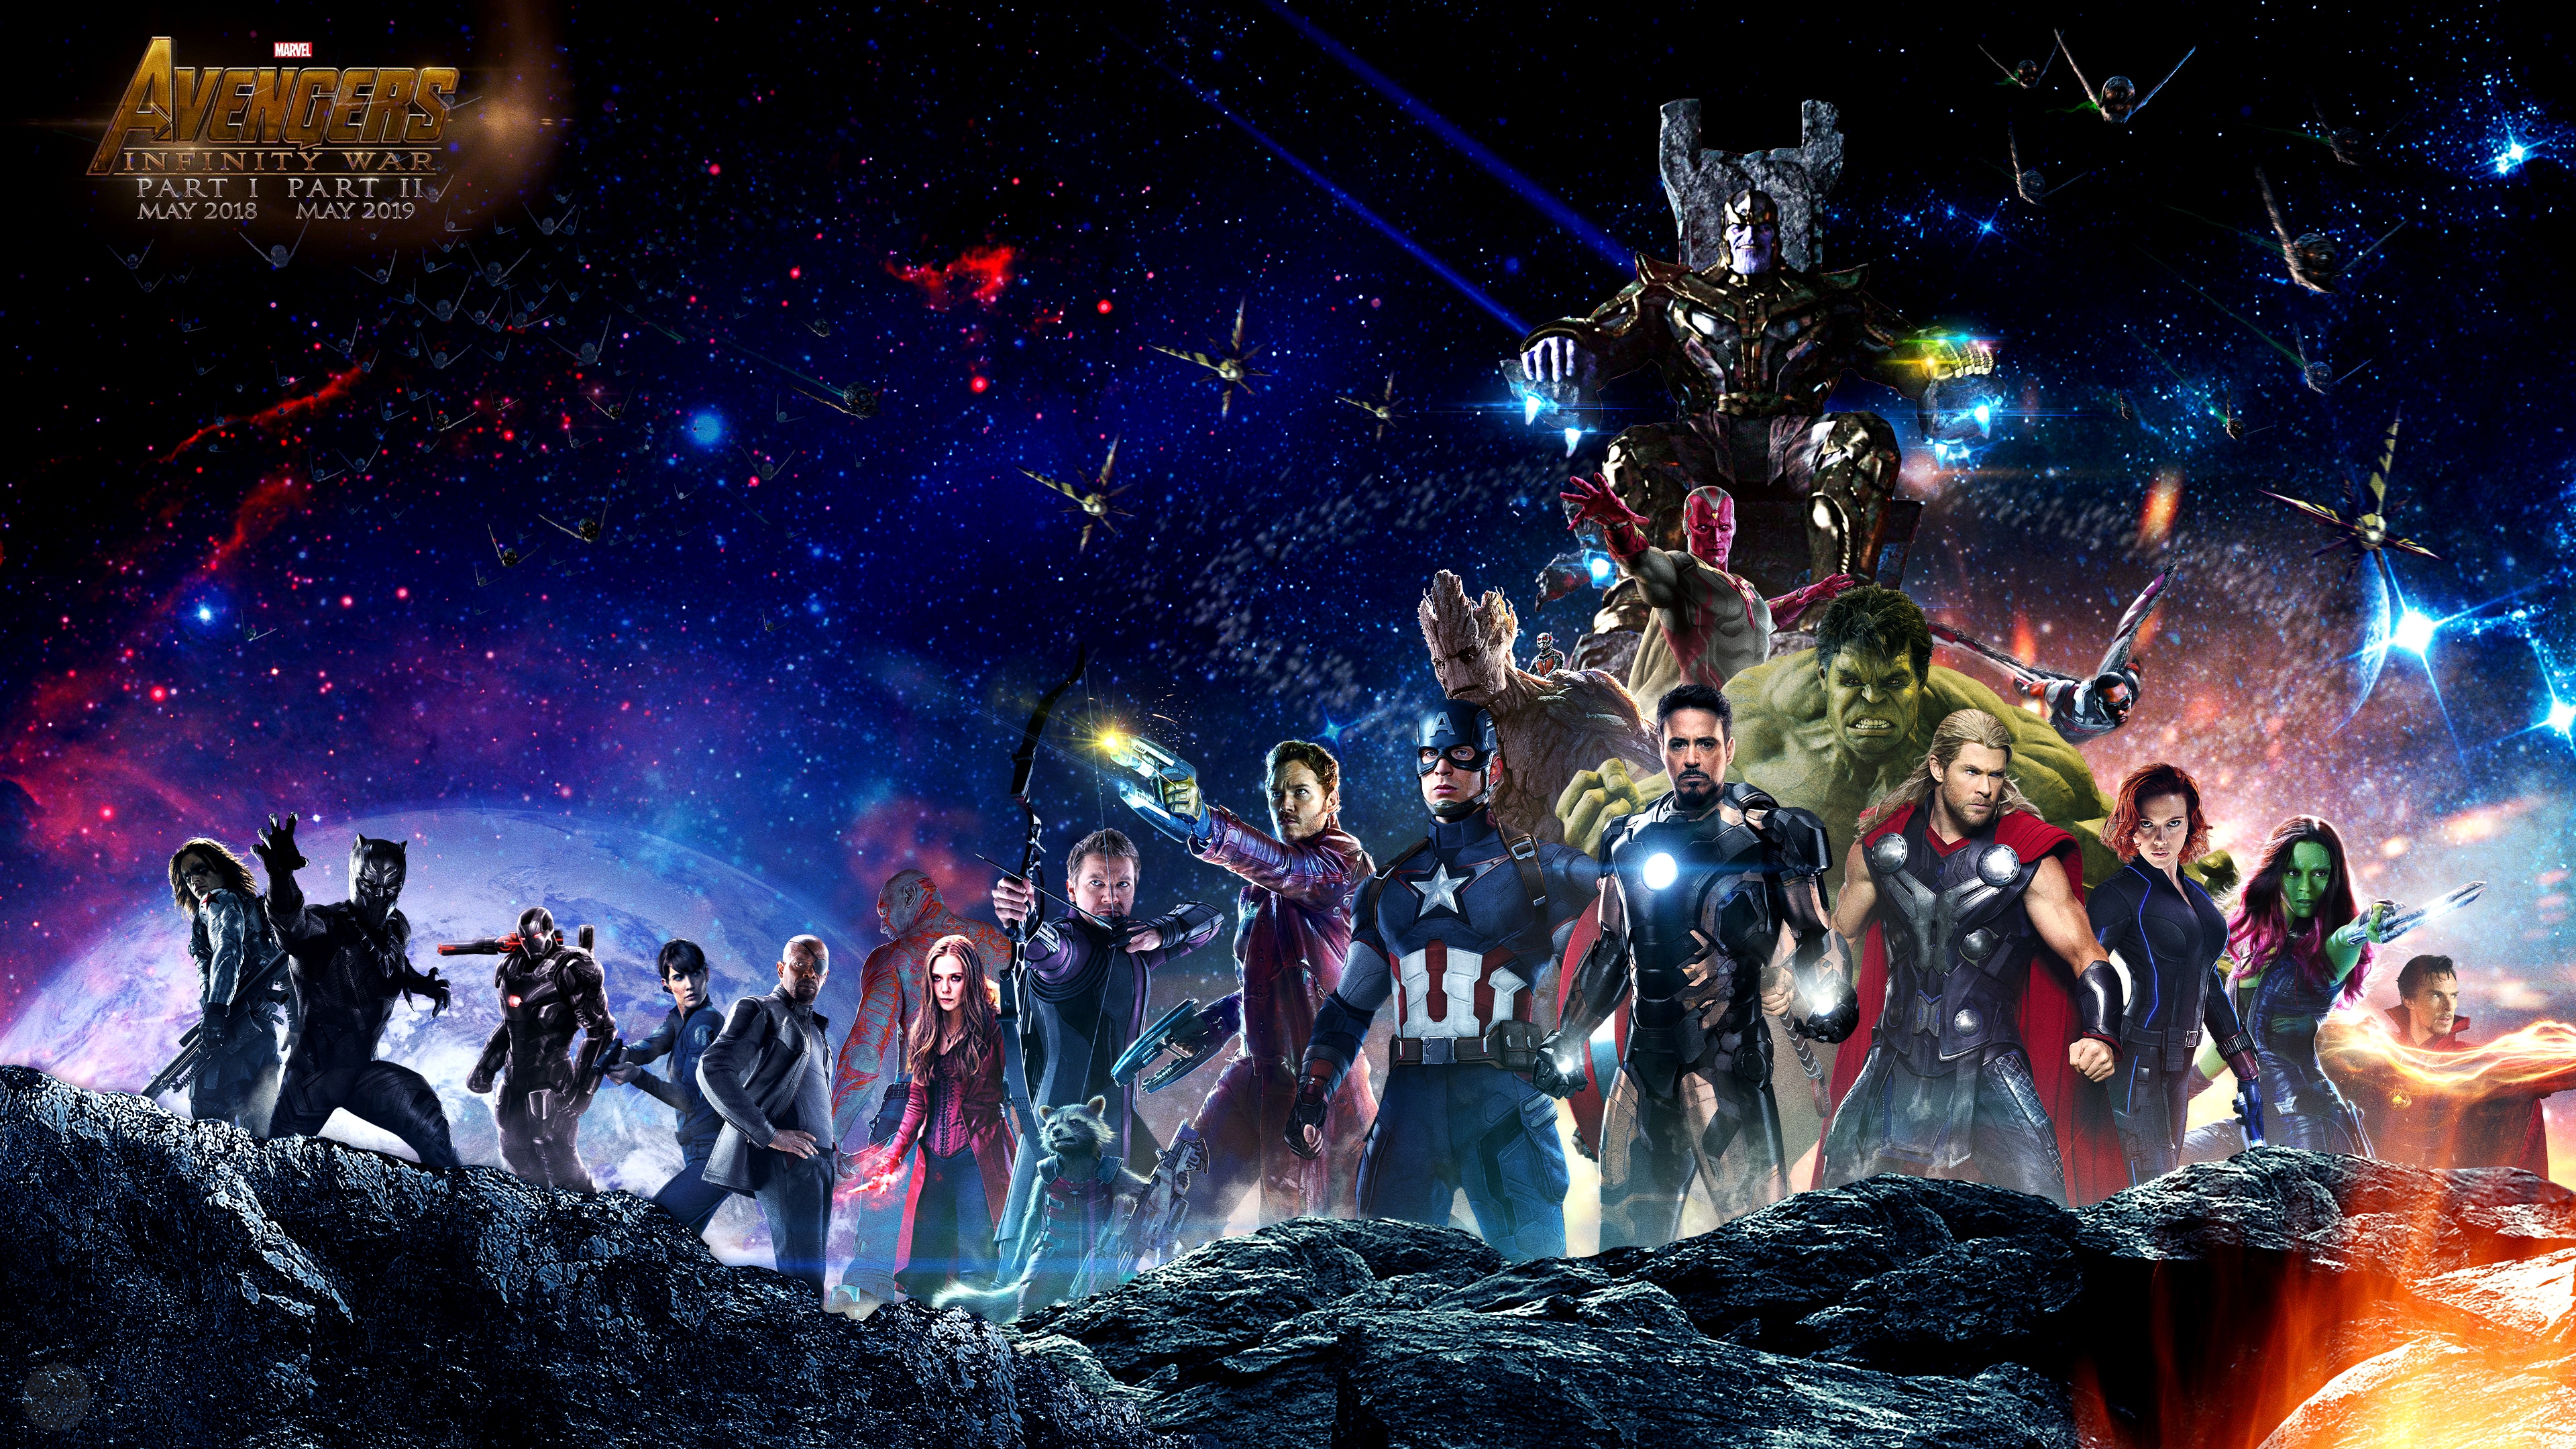 avengers, iron man, movie, avengers: infinity war, black panther (marvel comics), black widow, captain america, drax the destroyer, gamora, groot, hulk, nebula (marvel comics), nick fury, peter quill, rocket raccoon, star lord, thanos, thor, vision (marvel comics), war machine, winter soldier, the avengers for android